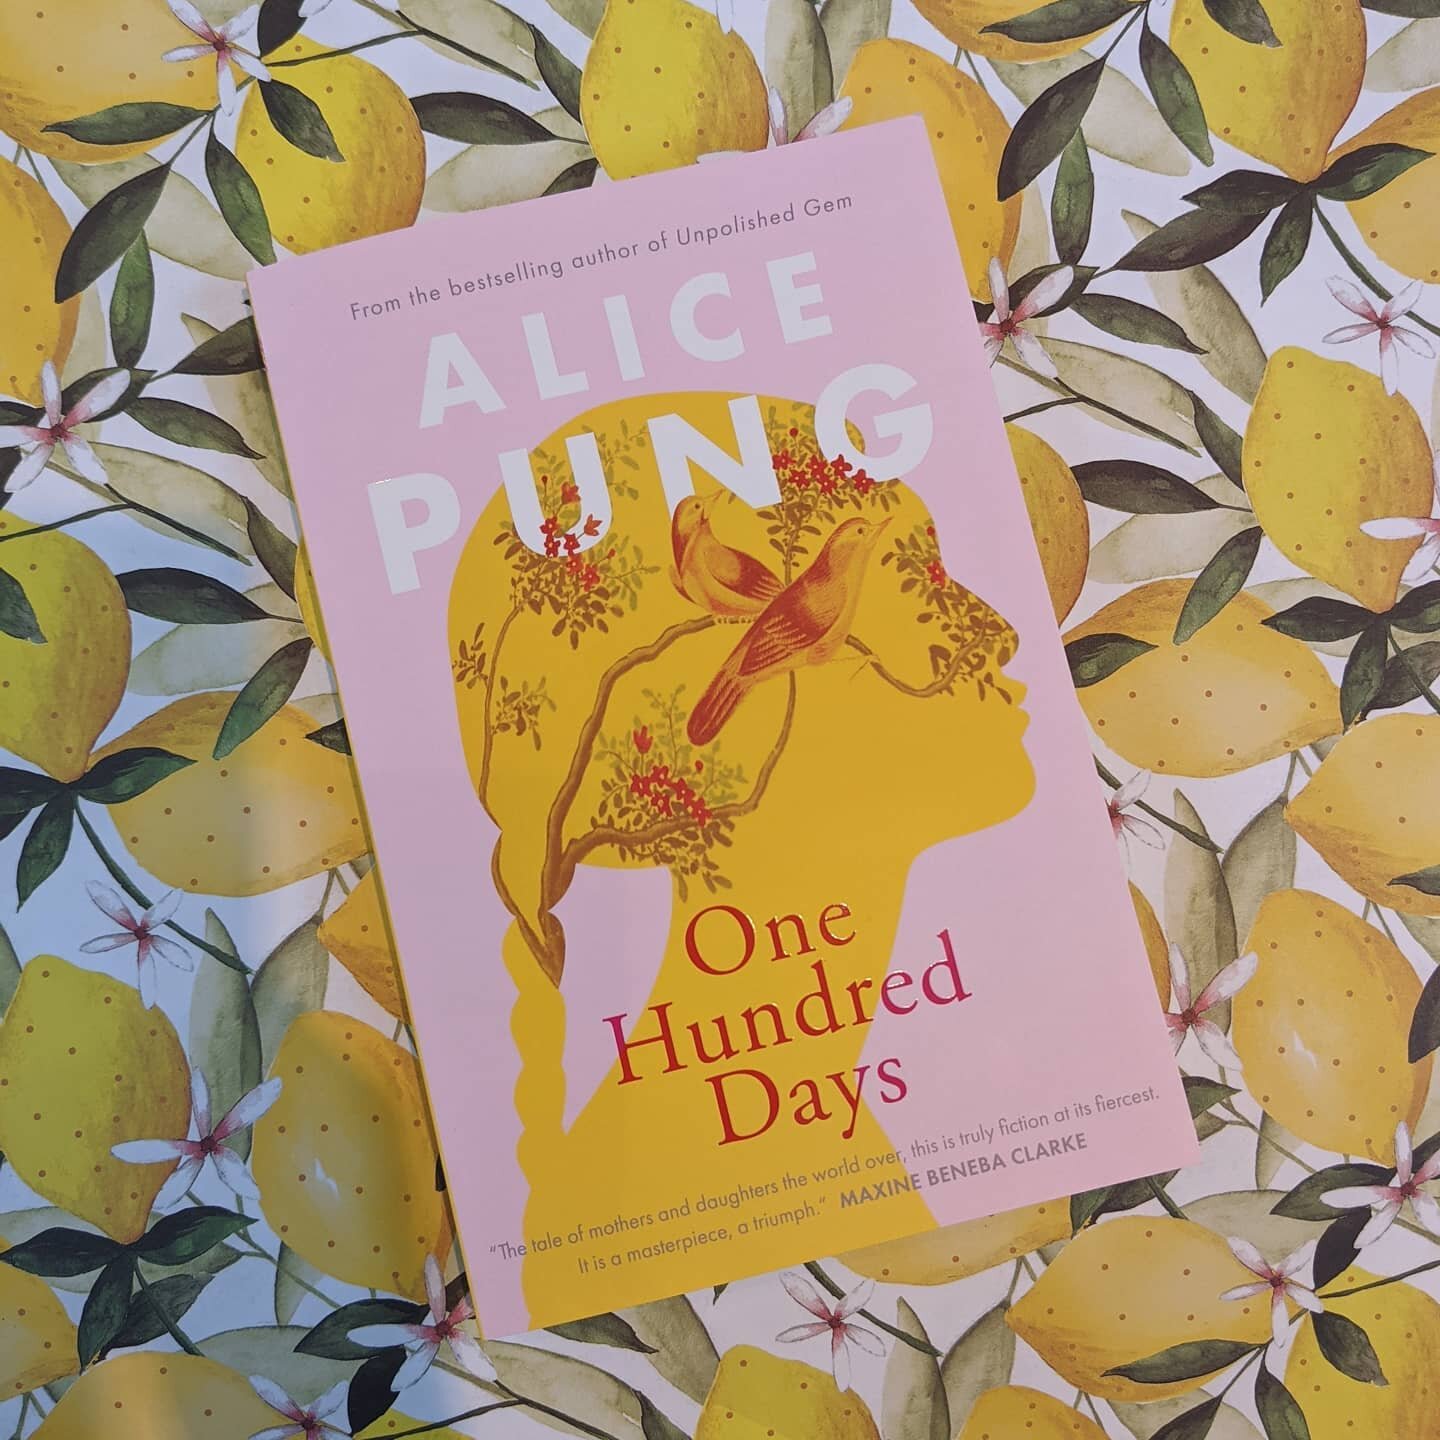 Natalie's 29th book of the year is Alice Pung's One Hundred Days. @blackincbooks